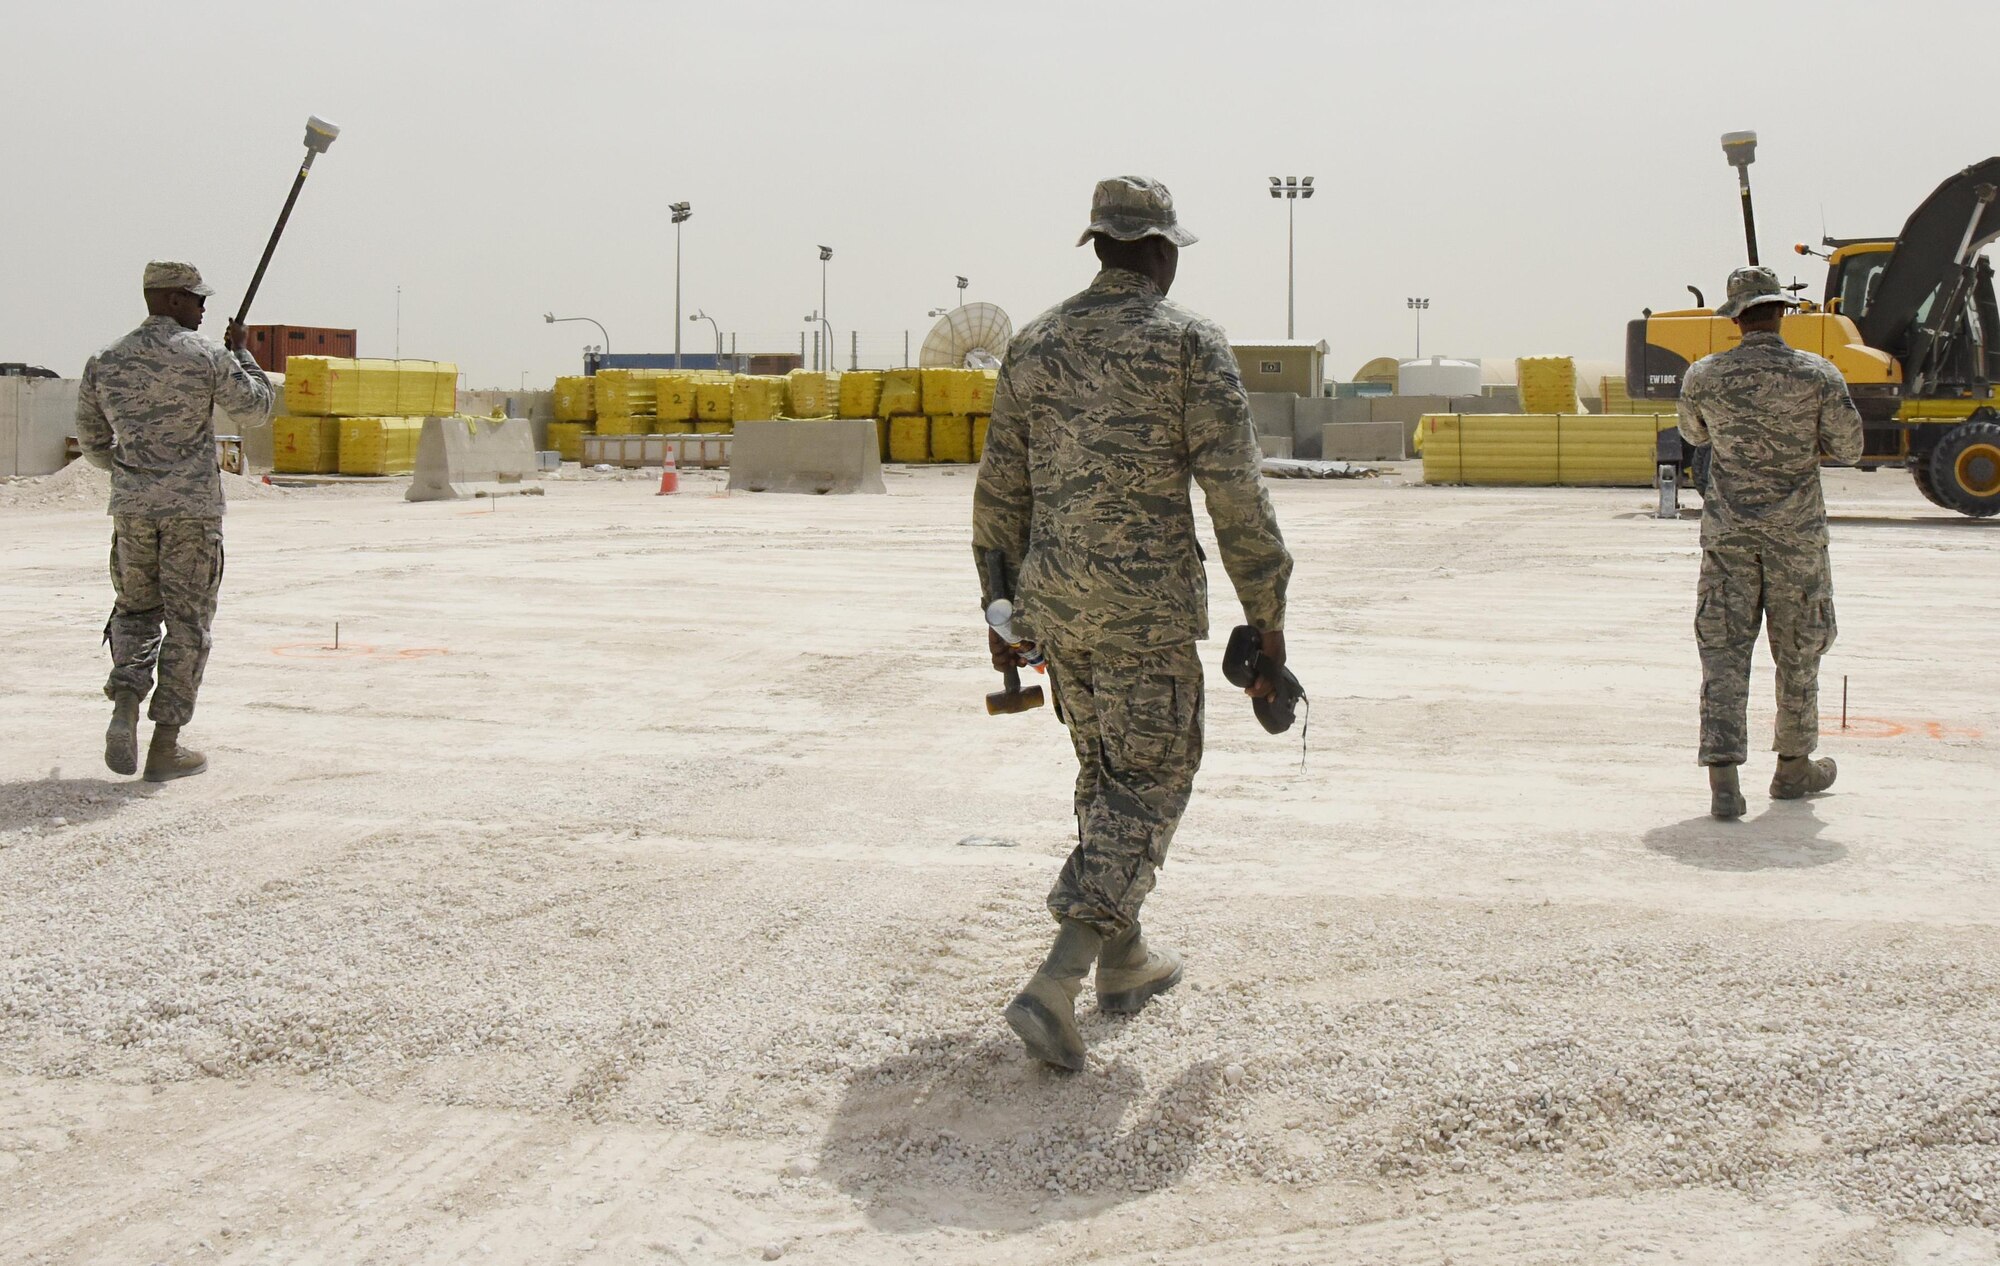 Airmen with the 379th Expeditionary Civil Engineer Squadron GEOBASE section prepare to survey a future construction site at Al Udeid Air Base, Qatar, March 15, 2017. These Airmen used a global positioning system hand-held unit to plot points for the structure that will be built. (U.S. Air Force photo by Senior Airman Cynthia A. Innocenti)